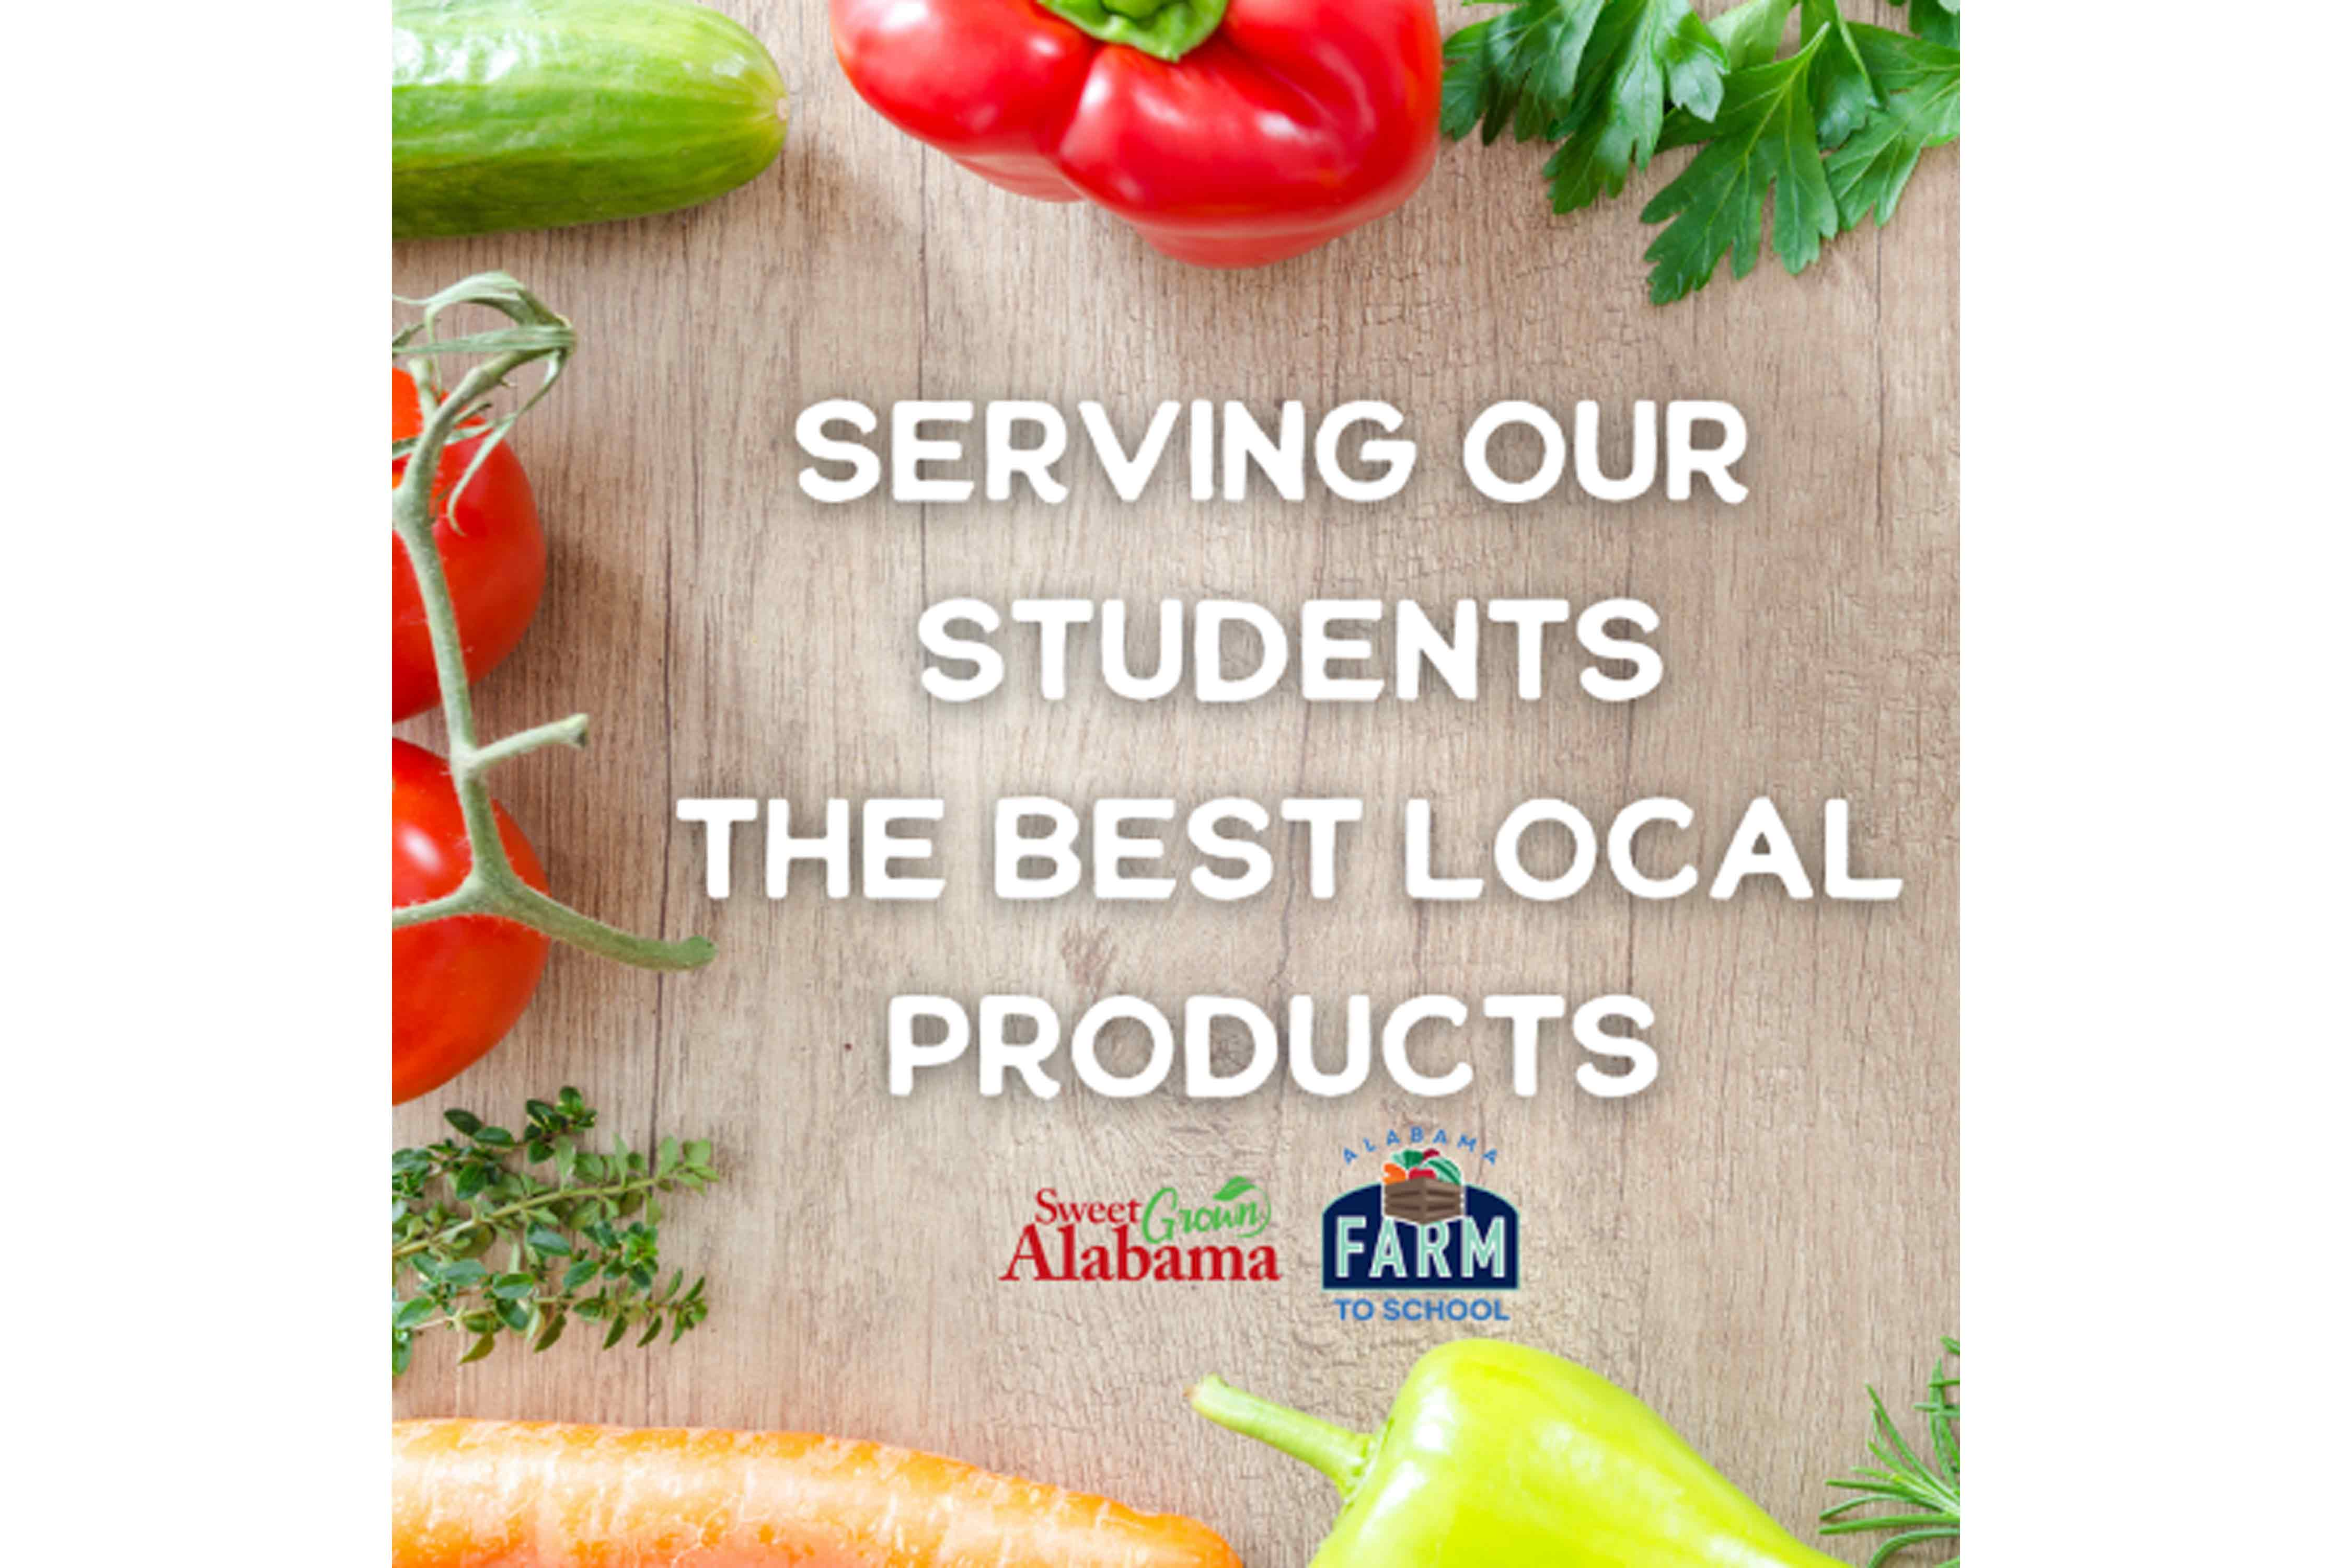 "Serving our students the best local products"